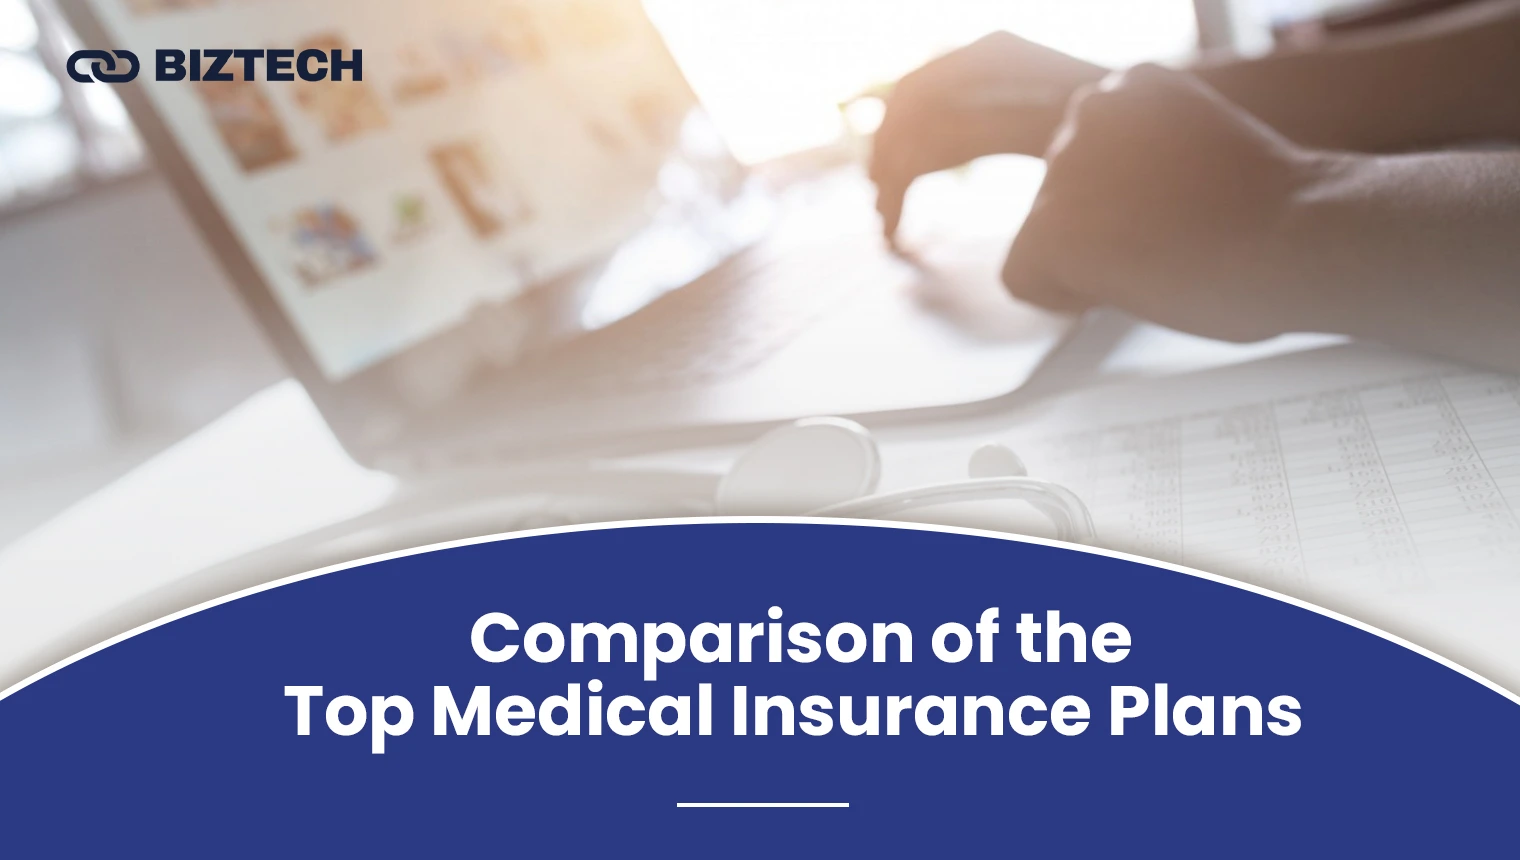 Comparison of the Top Medical Insurance Plans